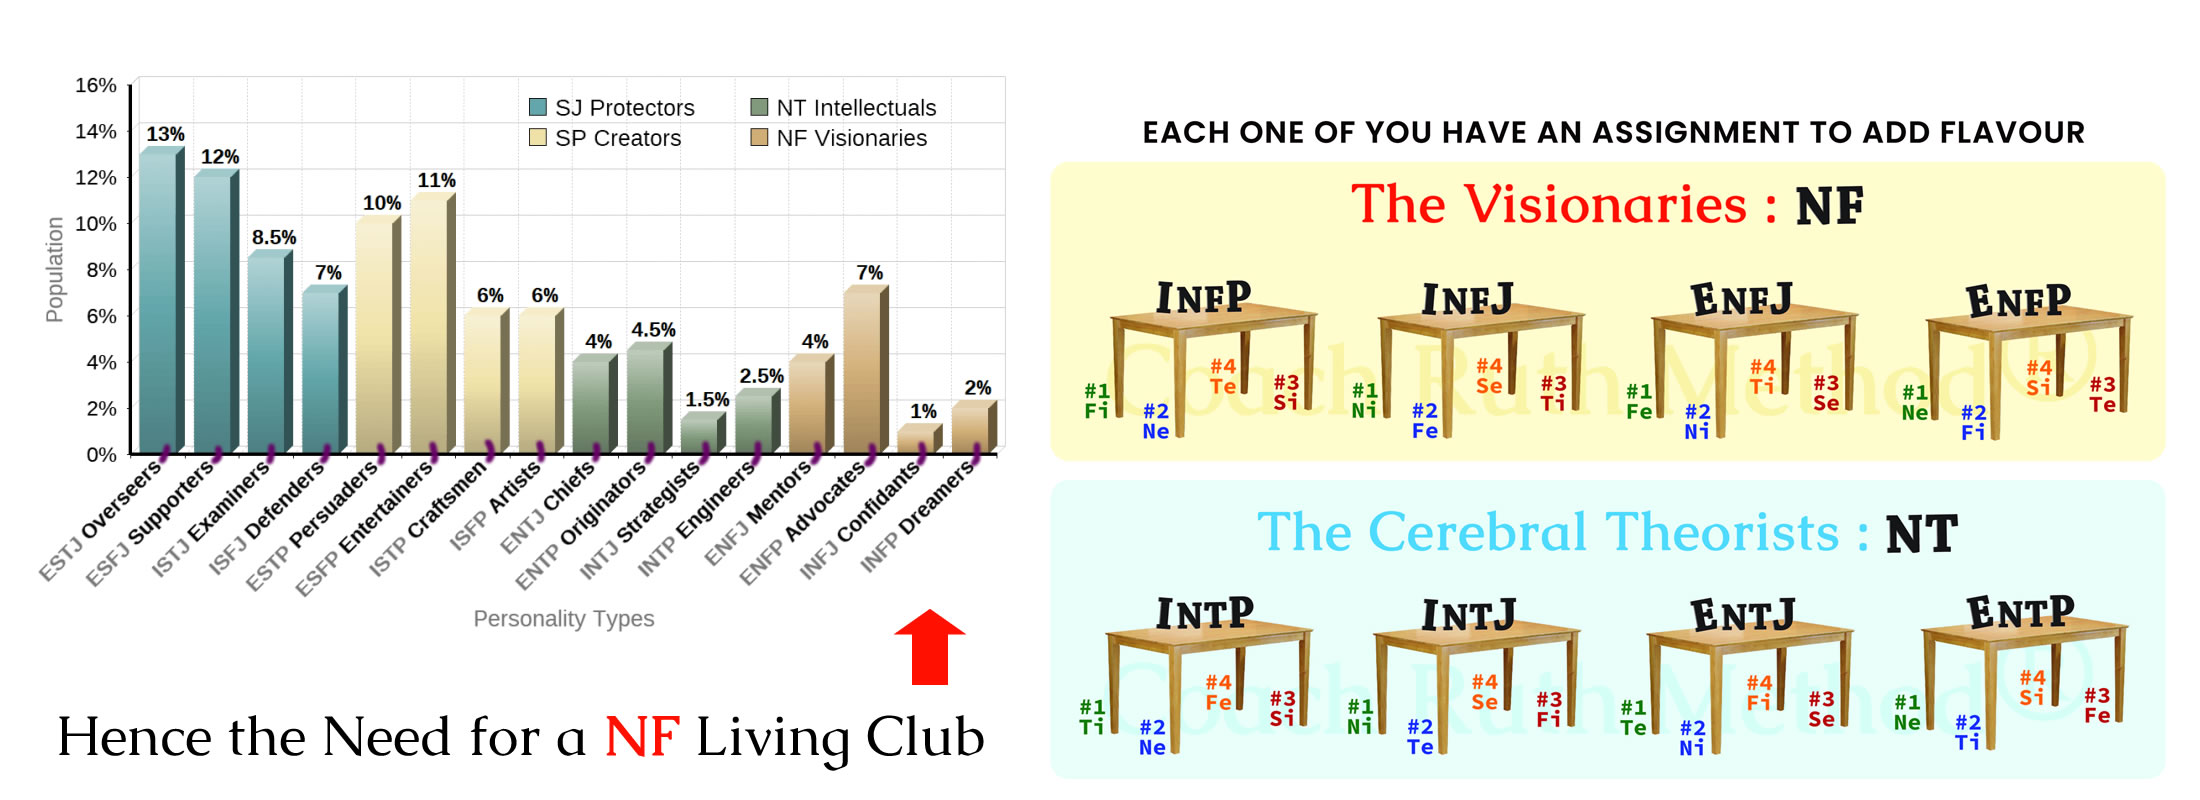 Why is there an NF LIVING CLUB?